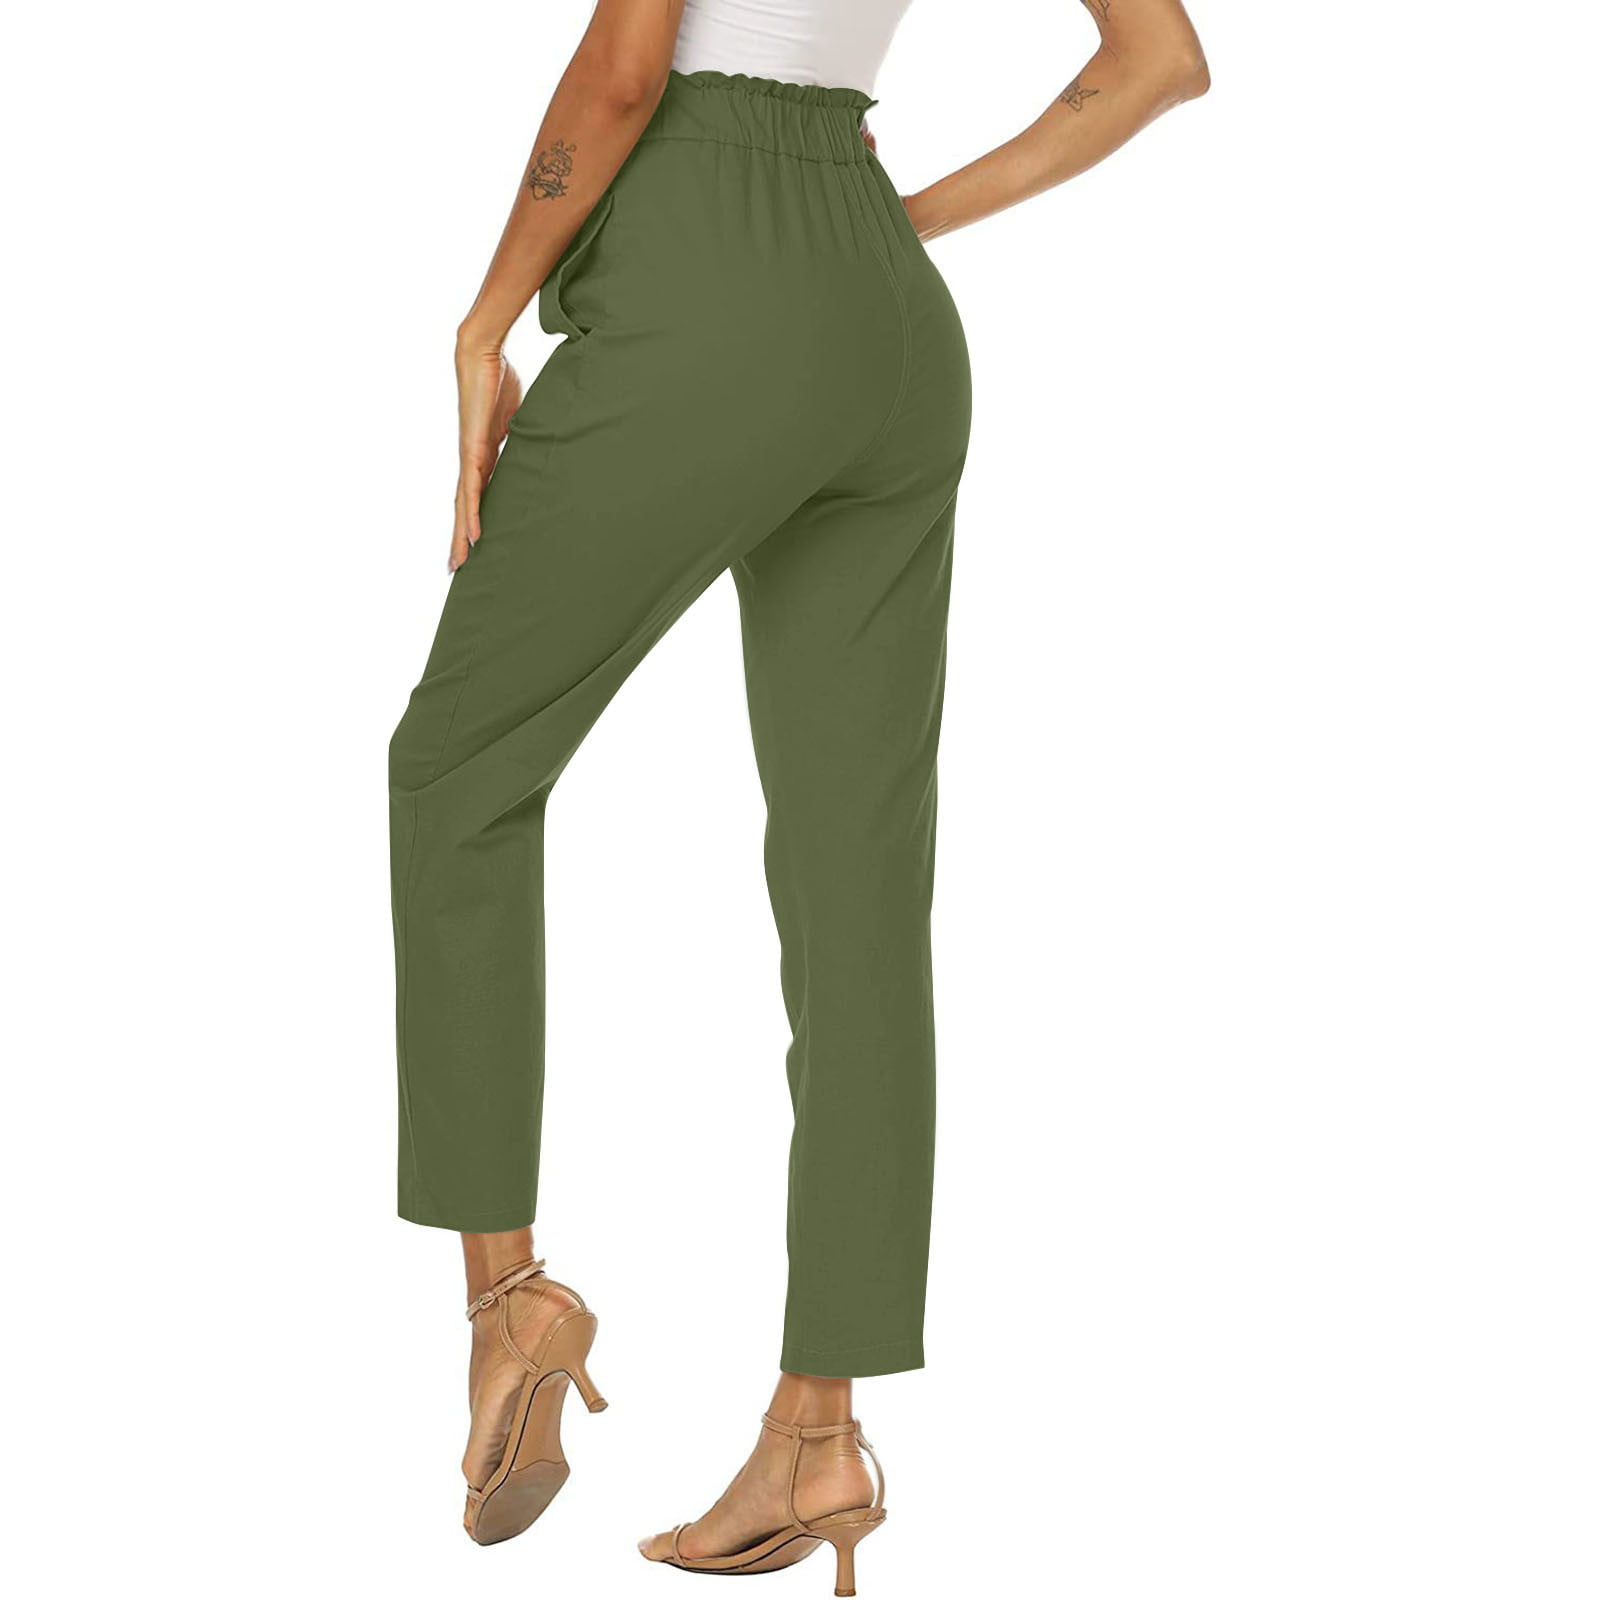 Xihbxyly Linen Pants for Women Womens Pants Cotton Linen Long Lounge Pants  Drawstring Back Elastic Waist Pants Casual Trousers with Pockets, Green, L